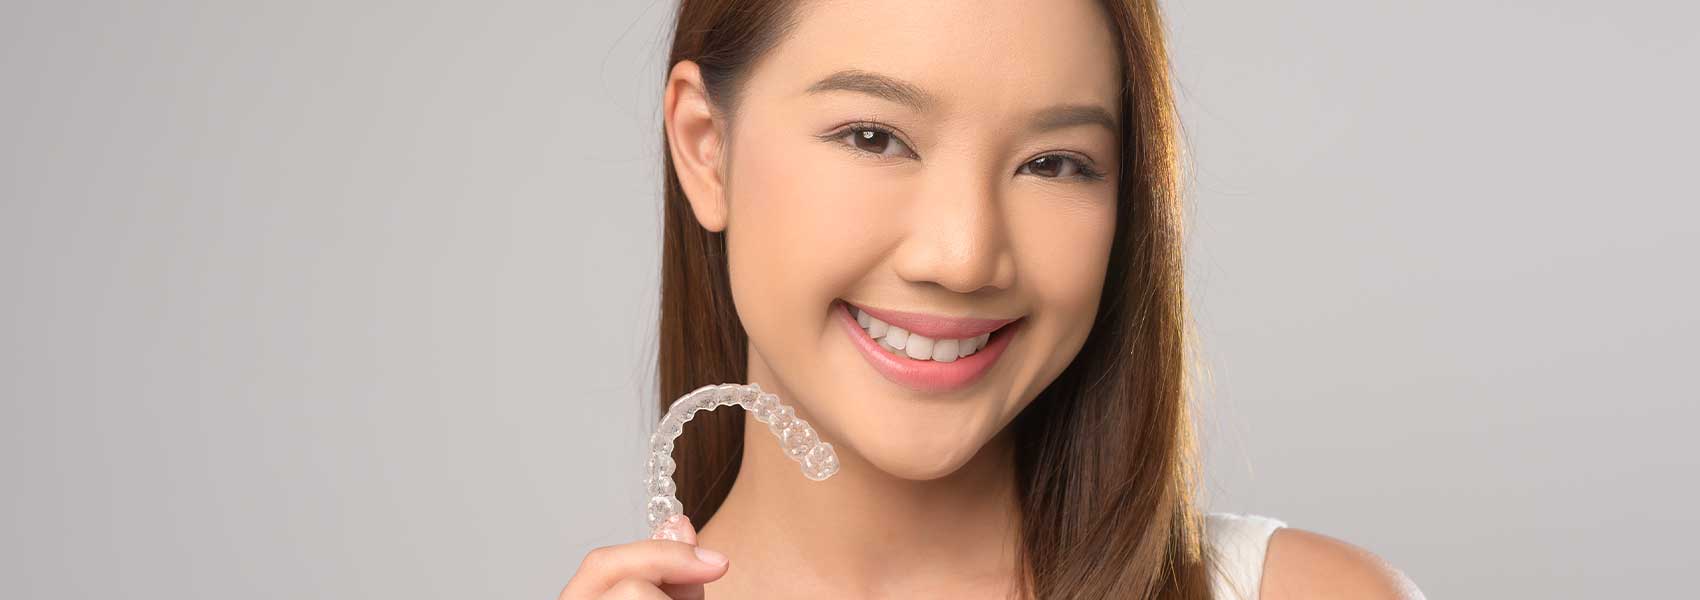 Beautiful girl is smiling and holding a Invisalign